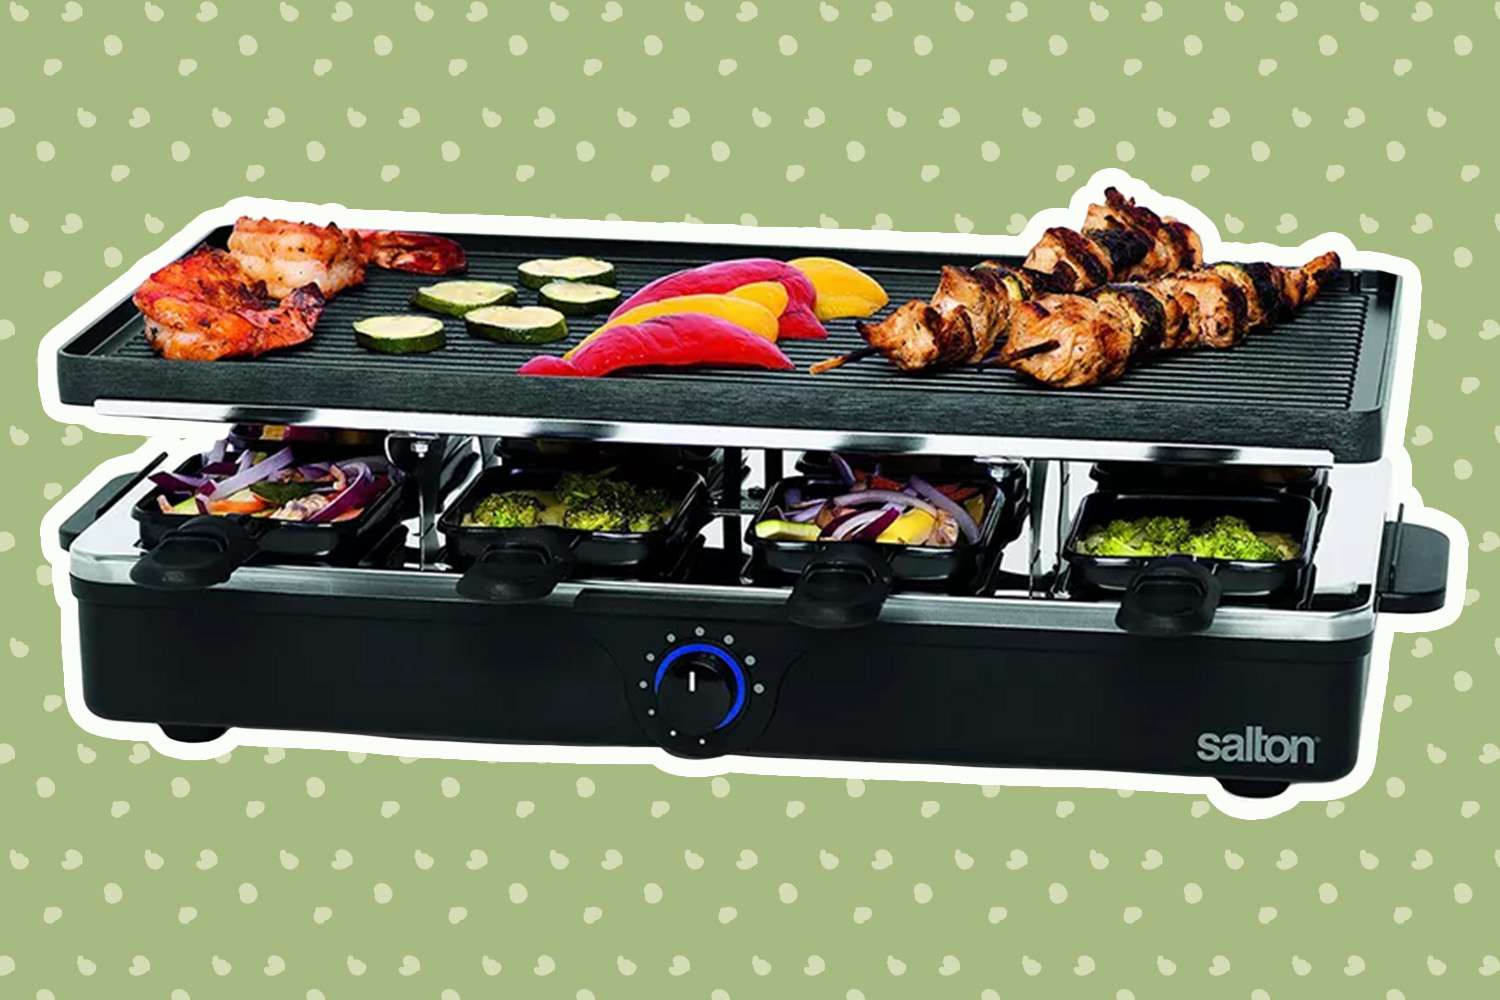 Salton 8-Person Party Grill and Raclette on a green background